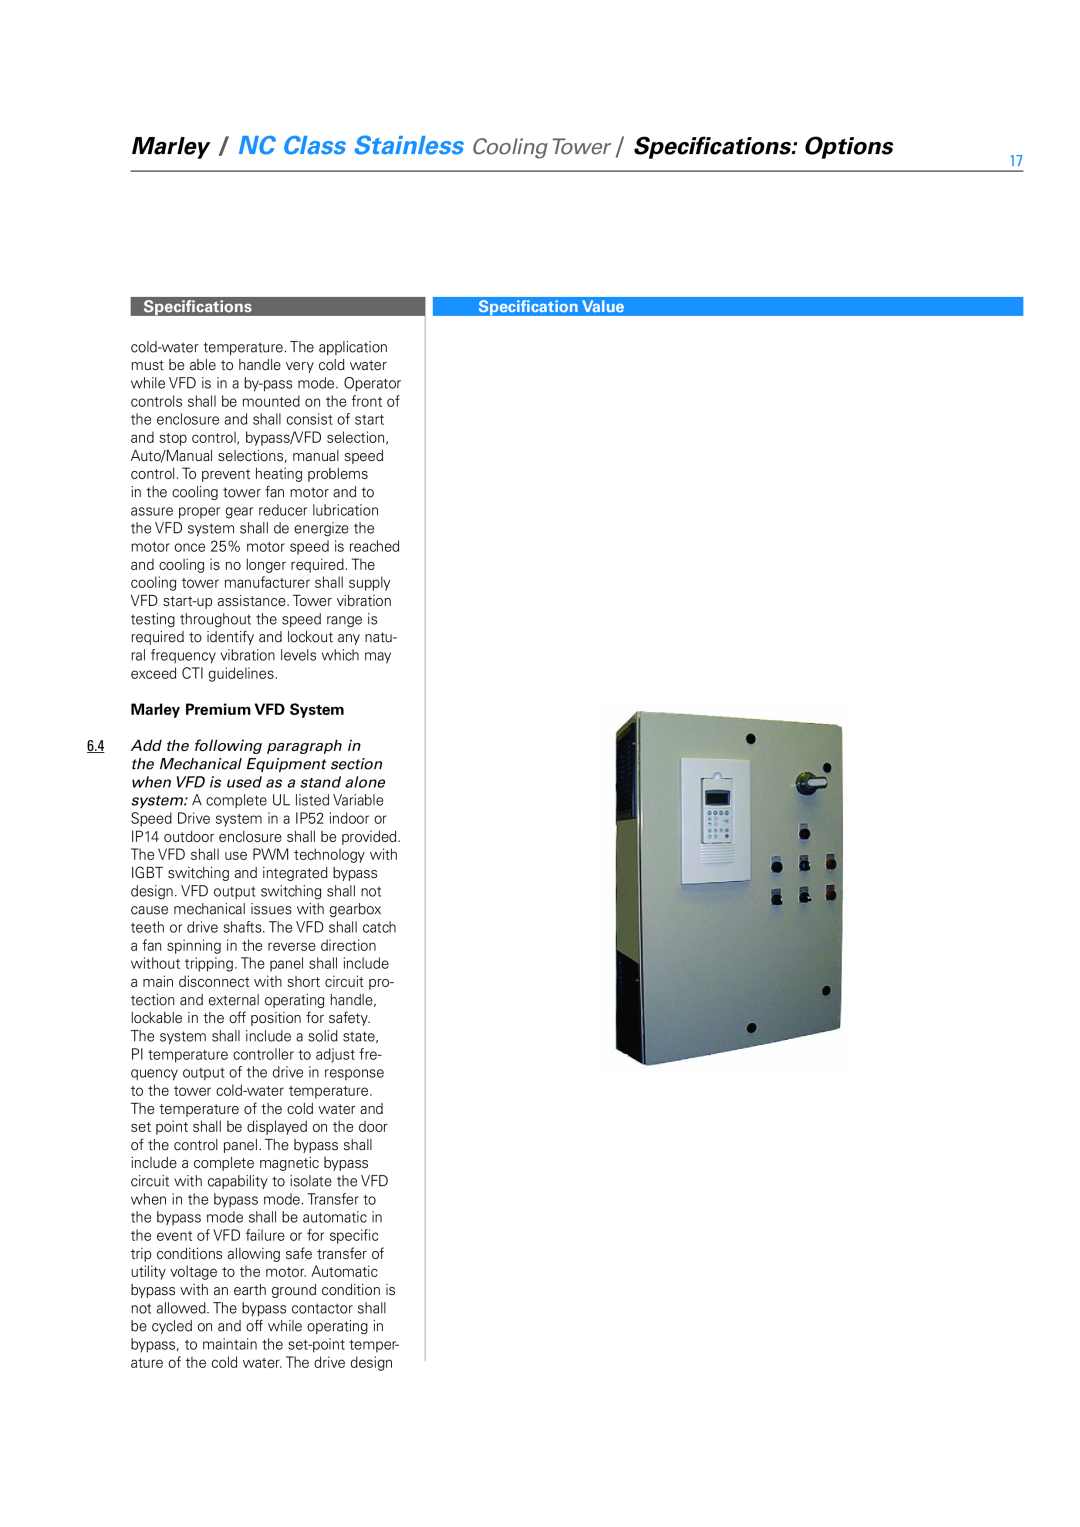 SPX Cooling Technologies SS-NC-08A specifications Specifications, Specification Value, Marley Premium VFD System 